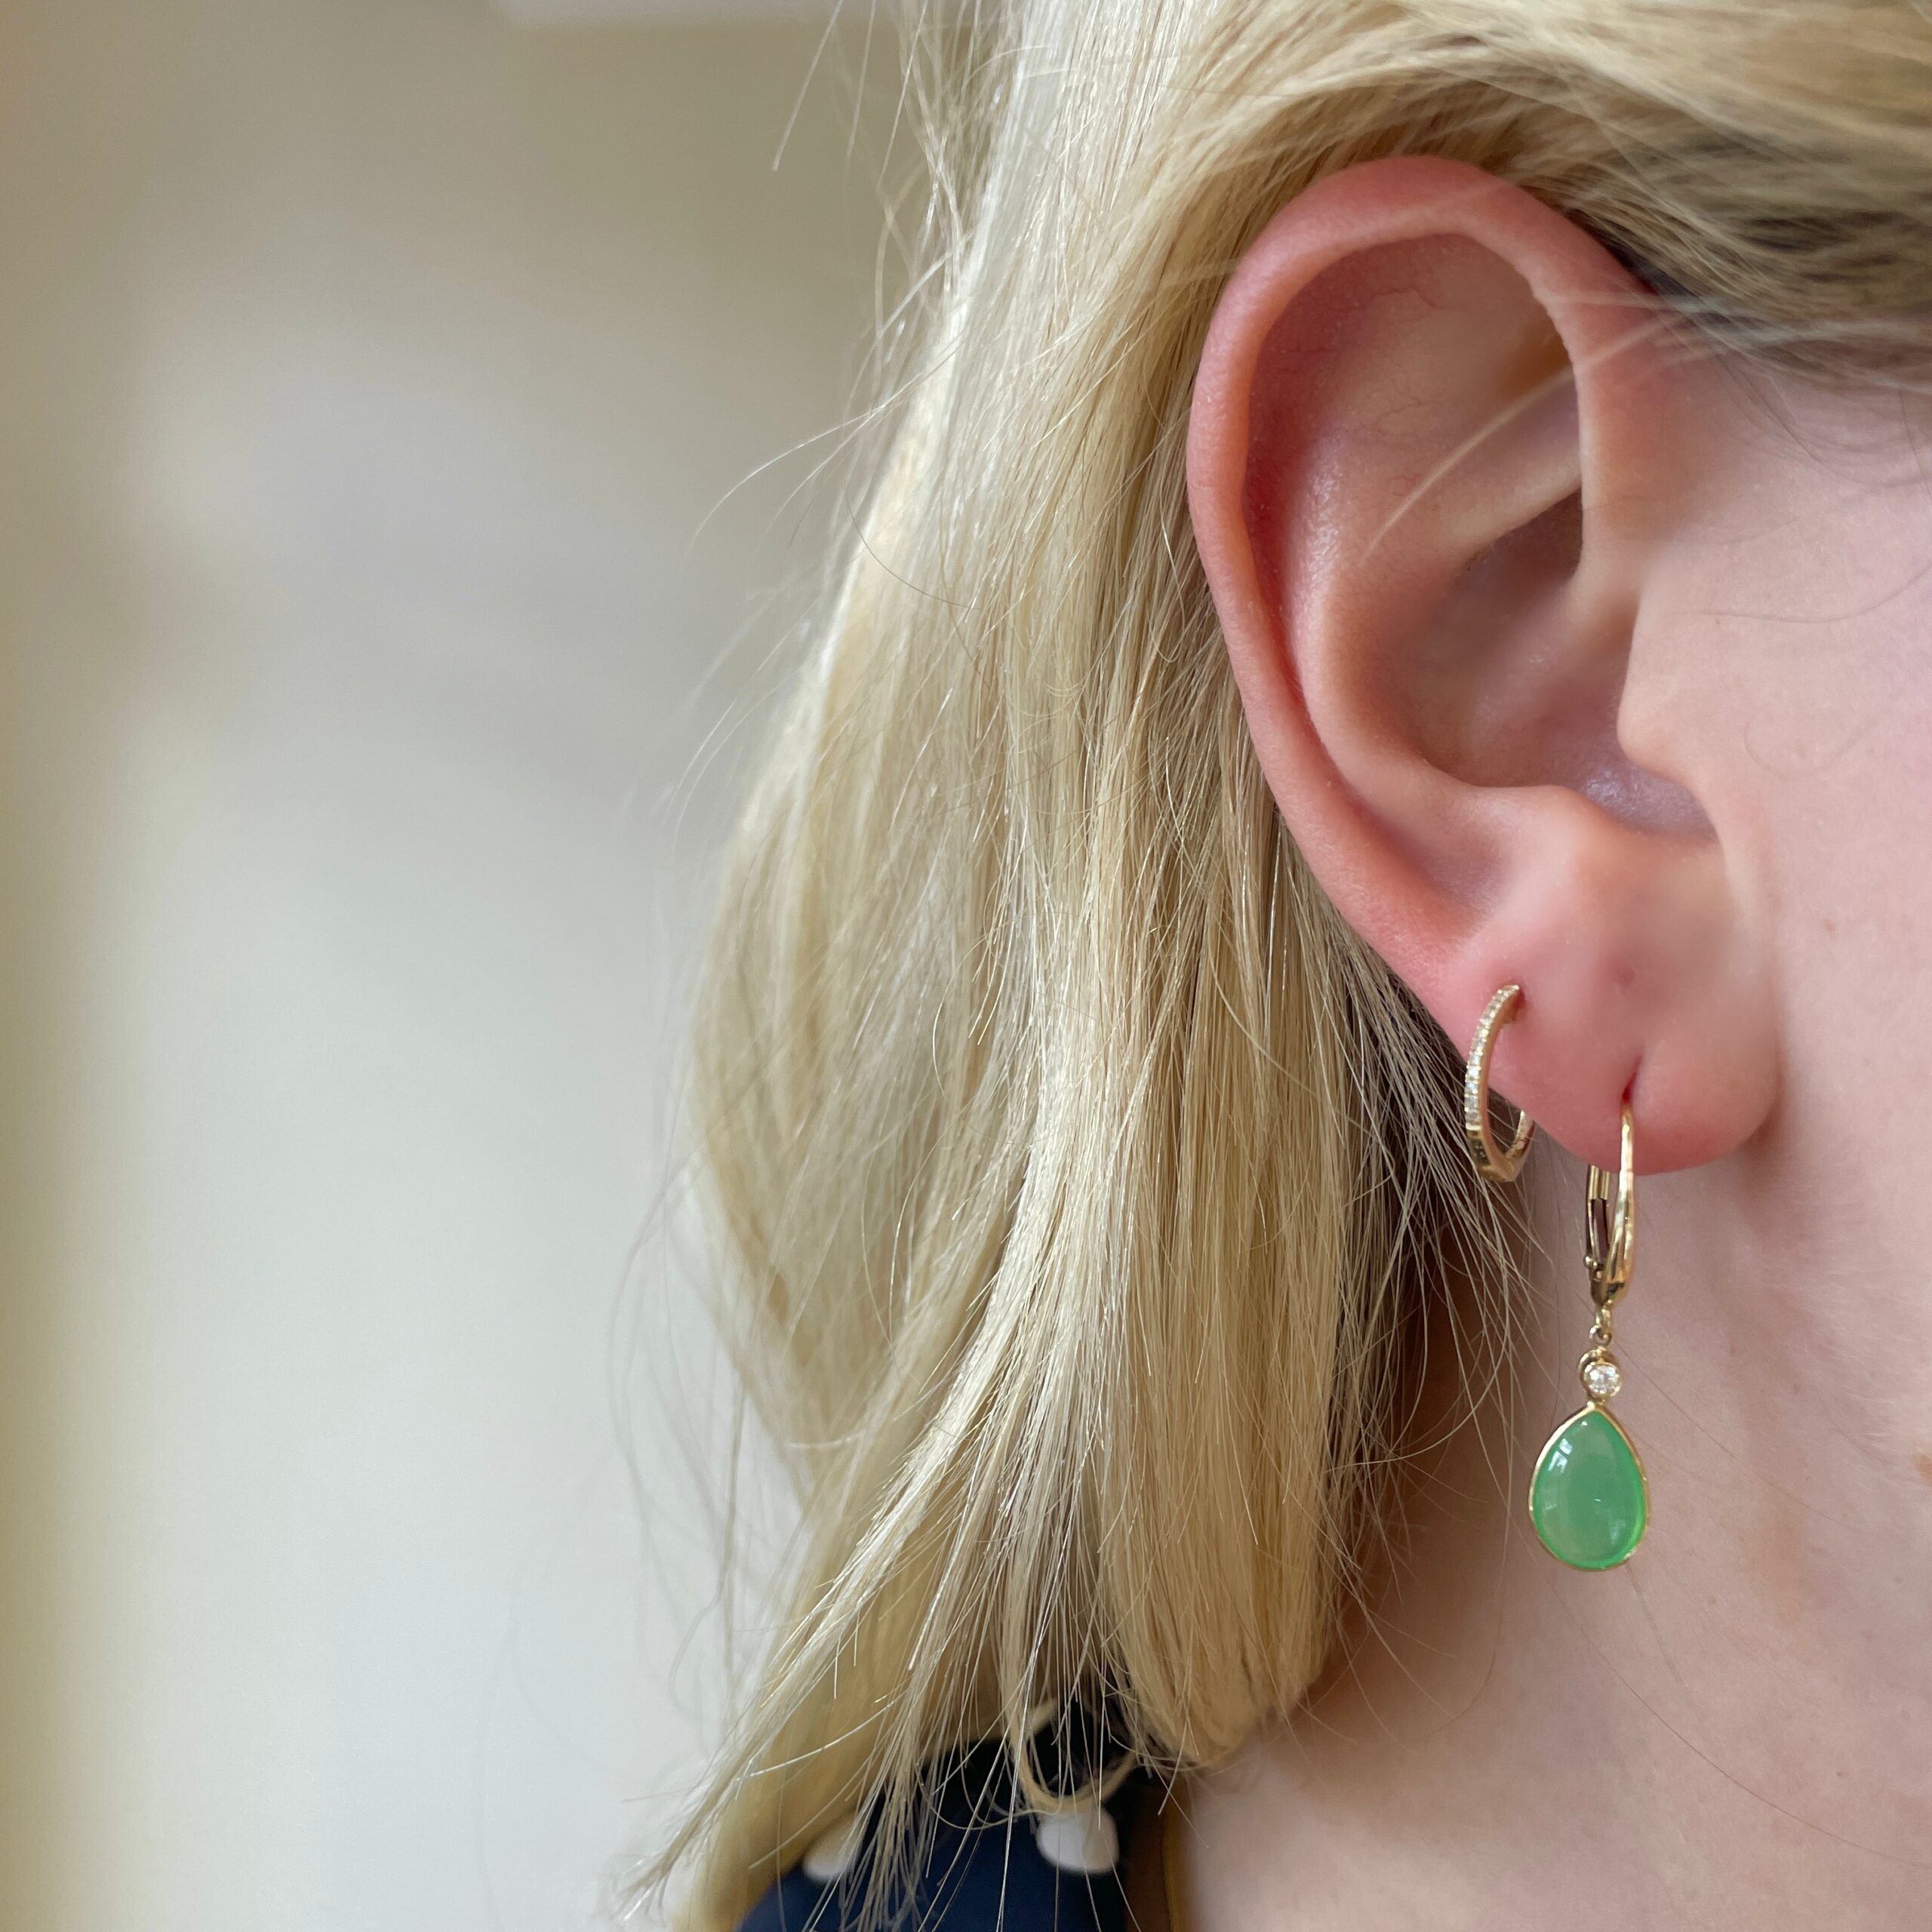 Yellow Gold Chrysoprase Briolette and Diamond Earrings